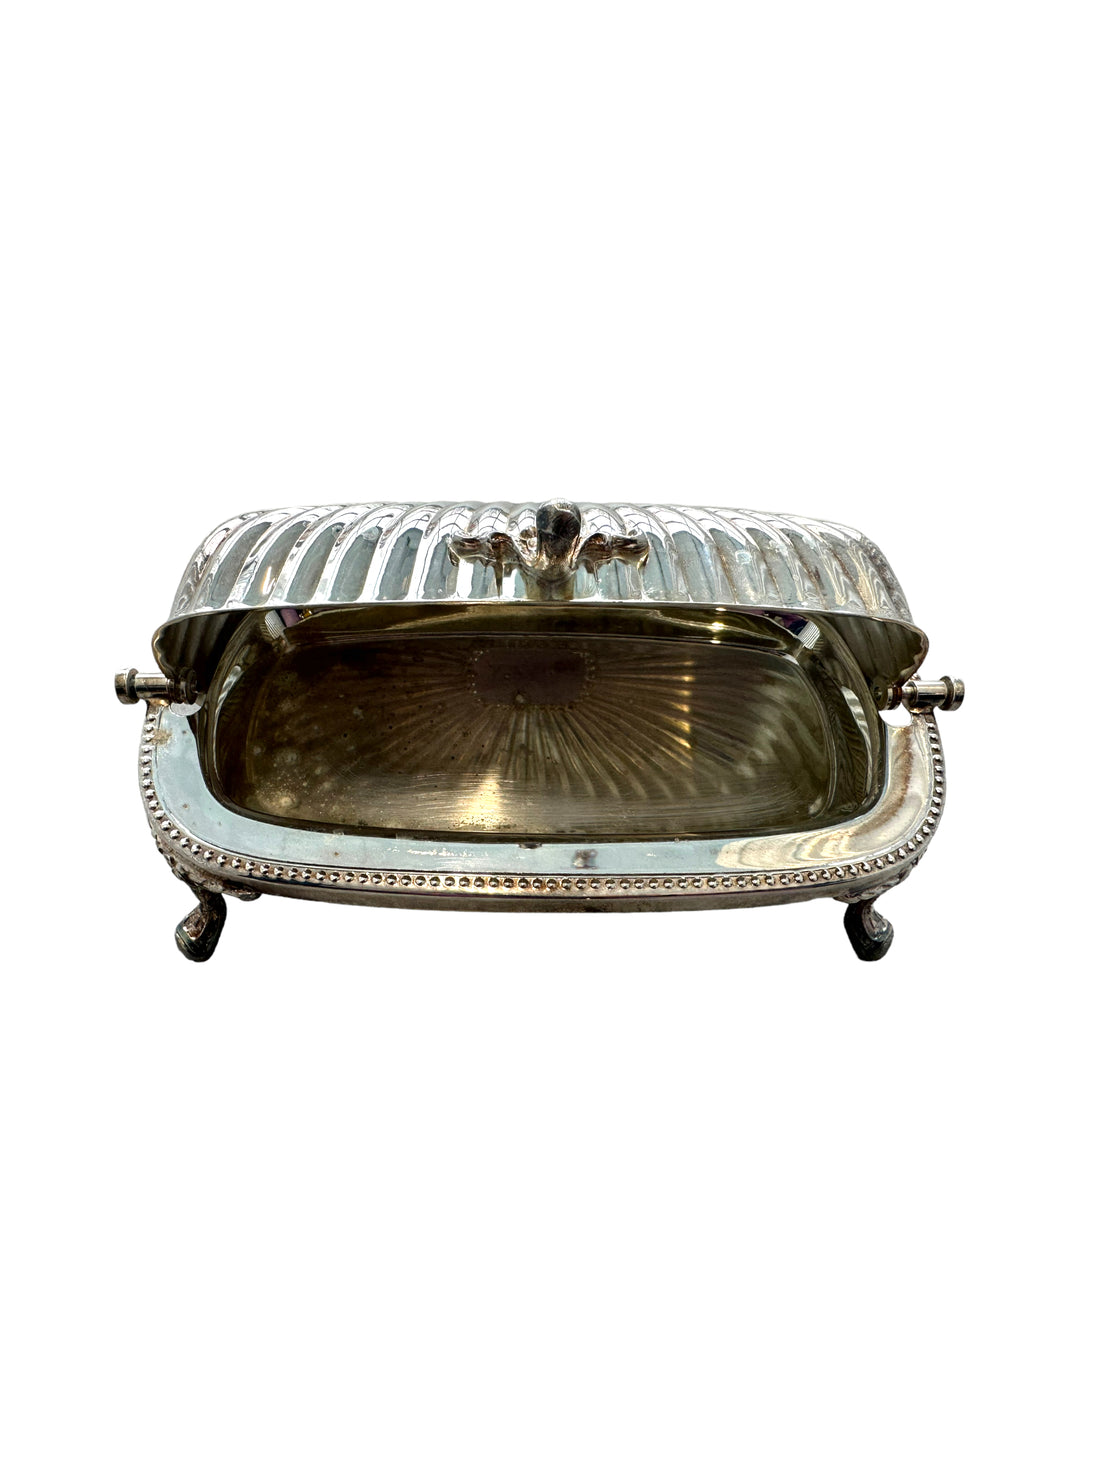 Silver Butter Dish